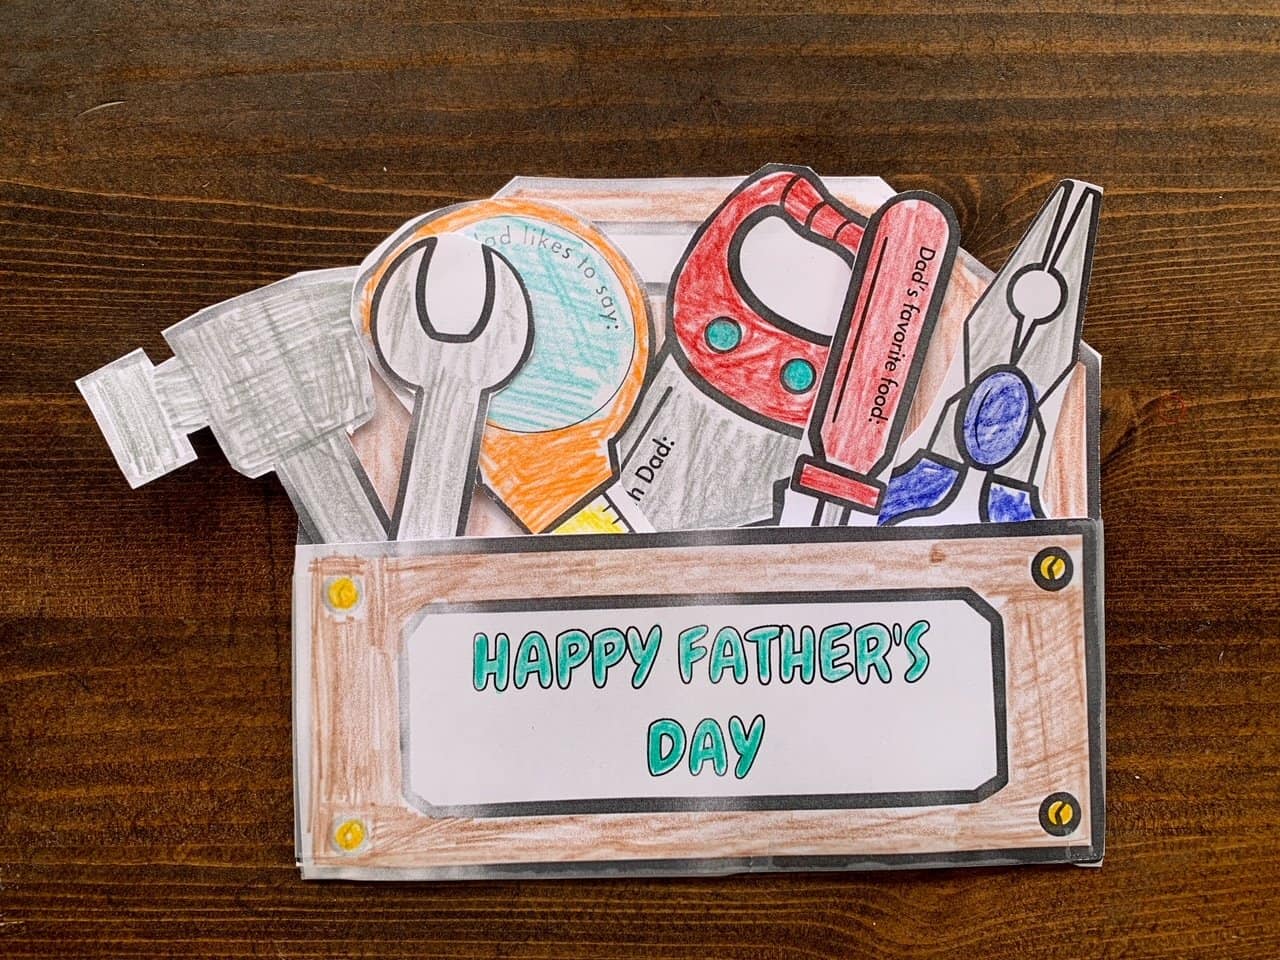 A photo of a Father's Day card craft shaped like a toolbox with tools